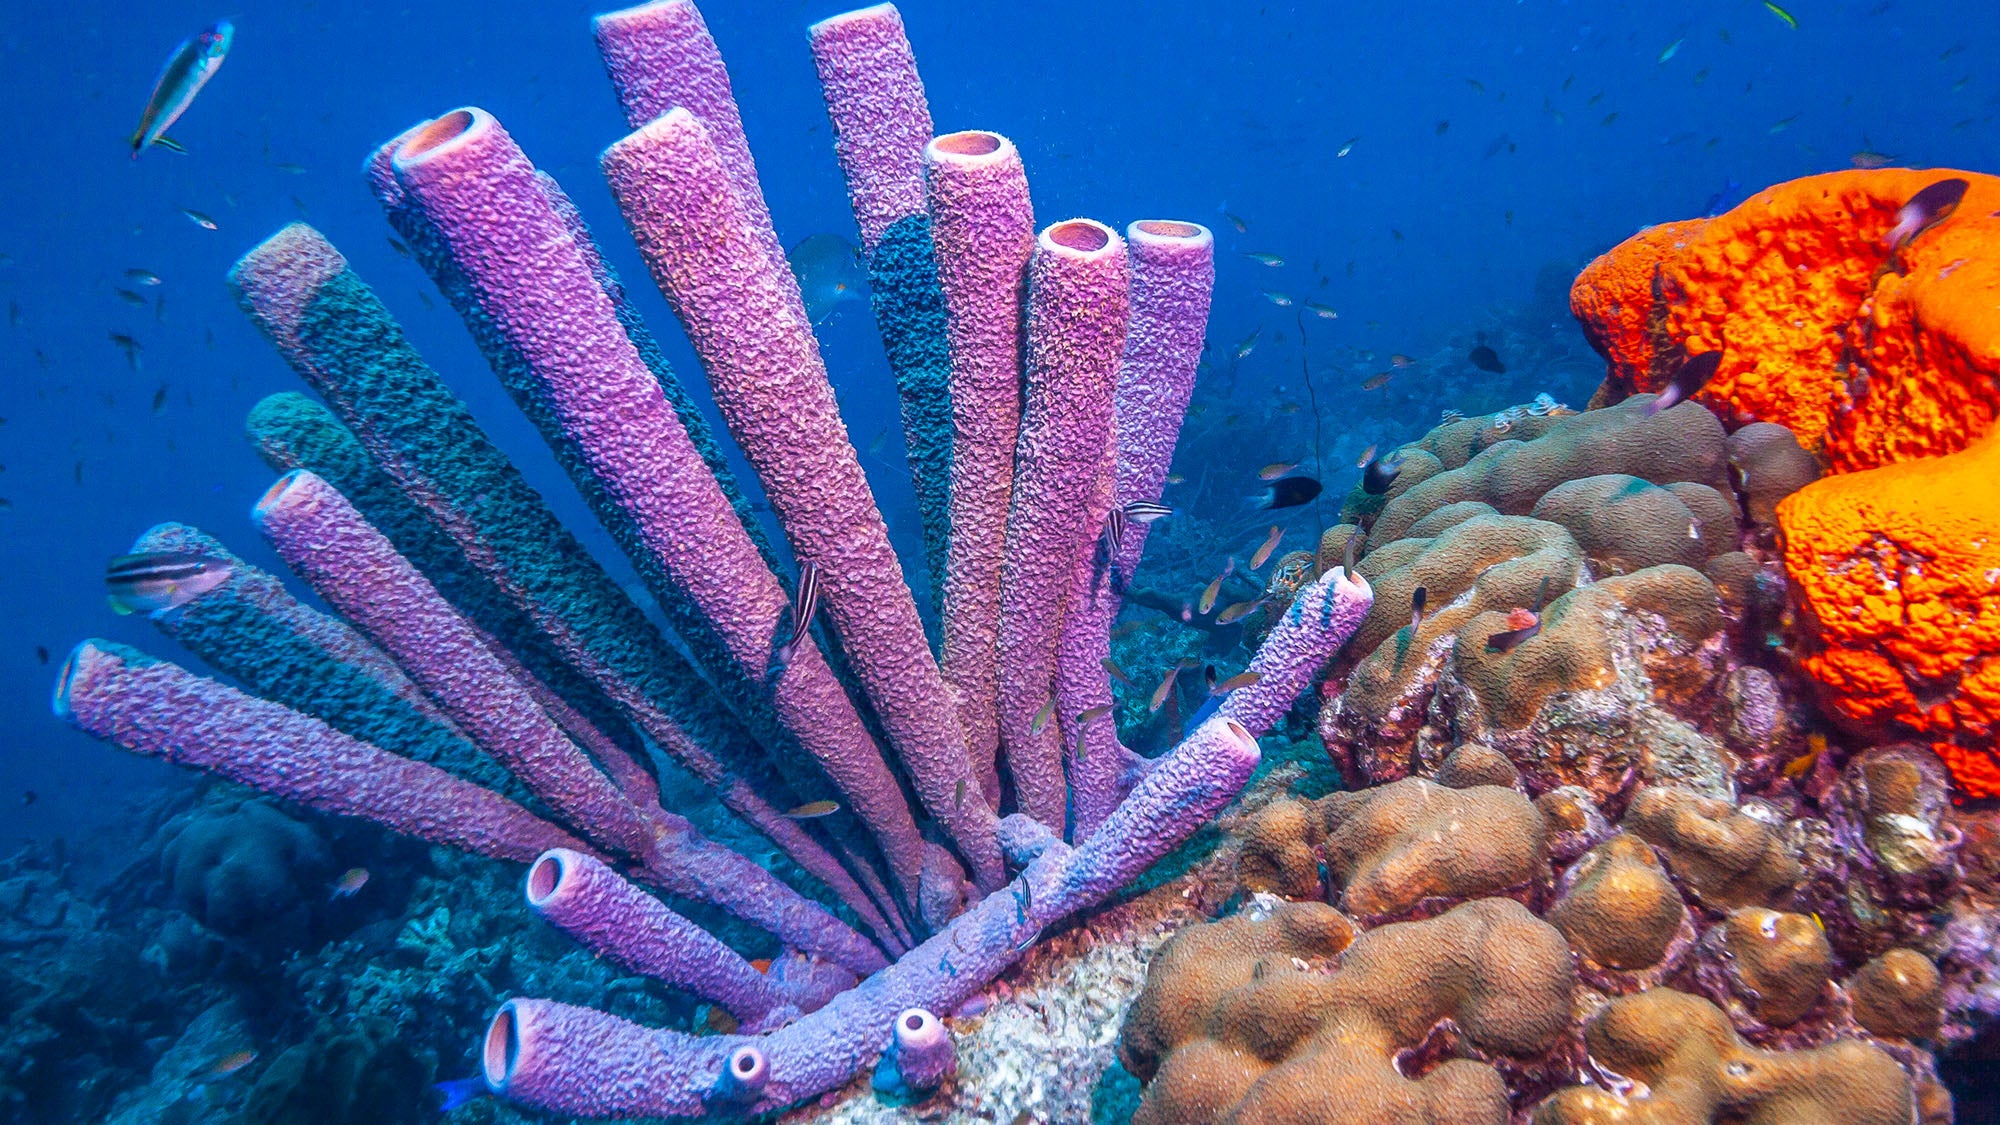 Sea sponges sneeze, but it takes them a while | Popular Science